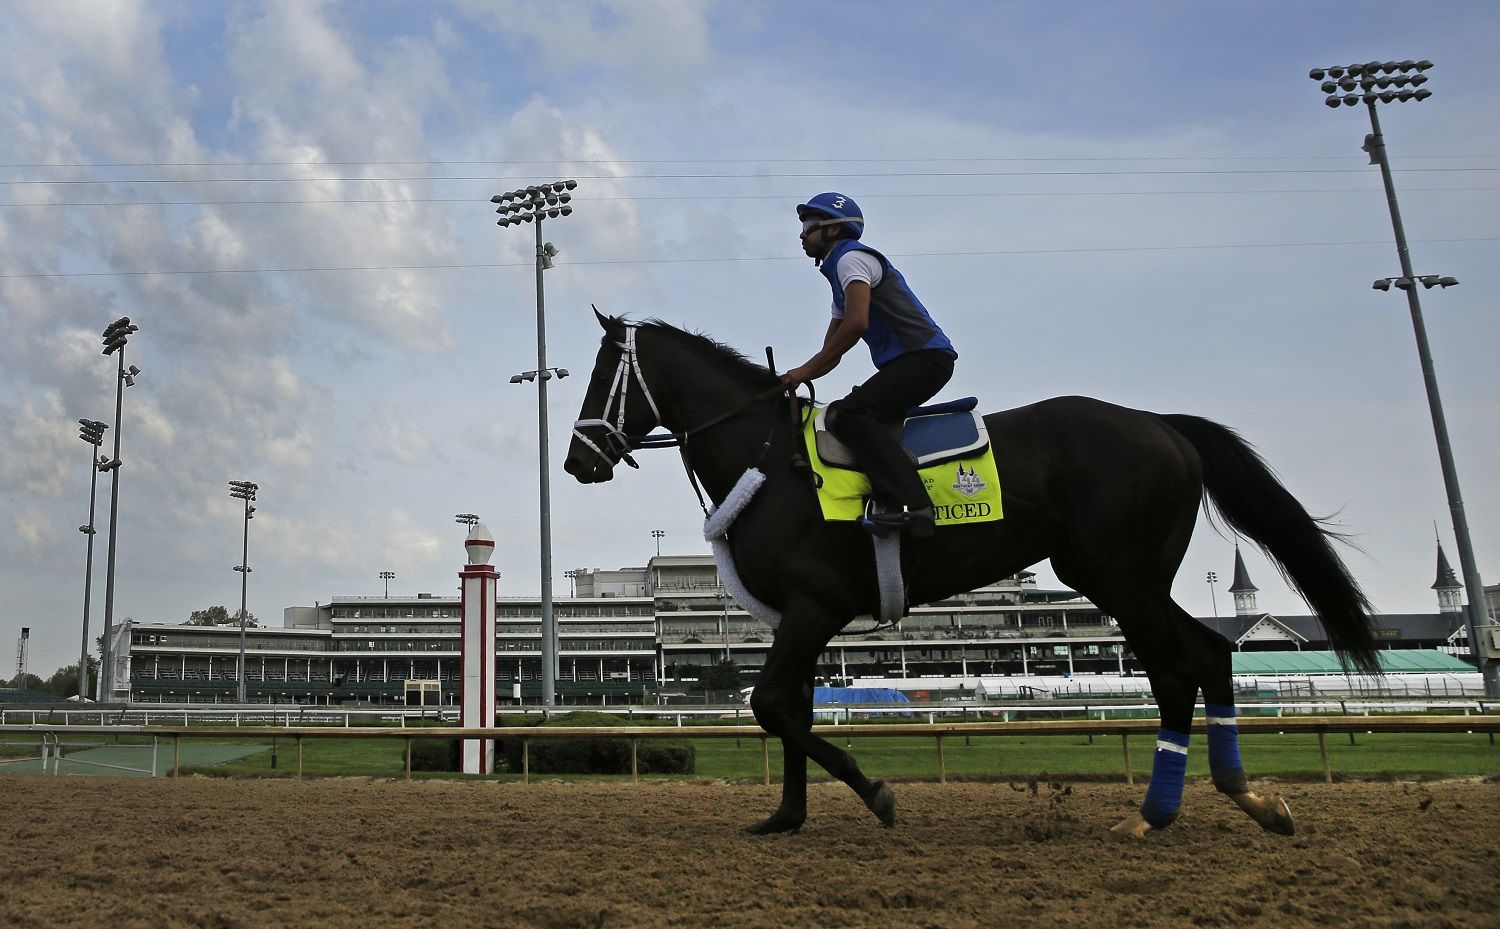 Kentucky Derby entrant Enticed runs during a morning workout at Churchill Downs Wednesday, May 2, 2018, in Louisville, Ky. The 144th running of the Kentucky Derby is scheduled for Saturday, May 5. (AP Photo/Charlie Riedel)